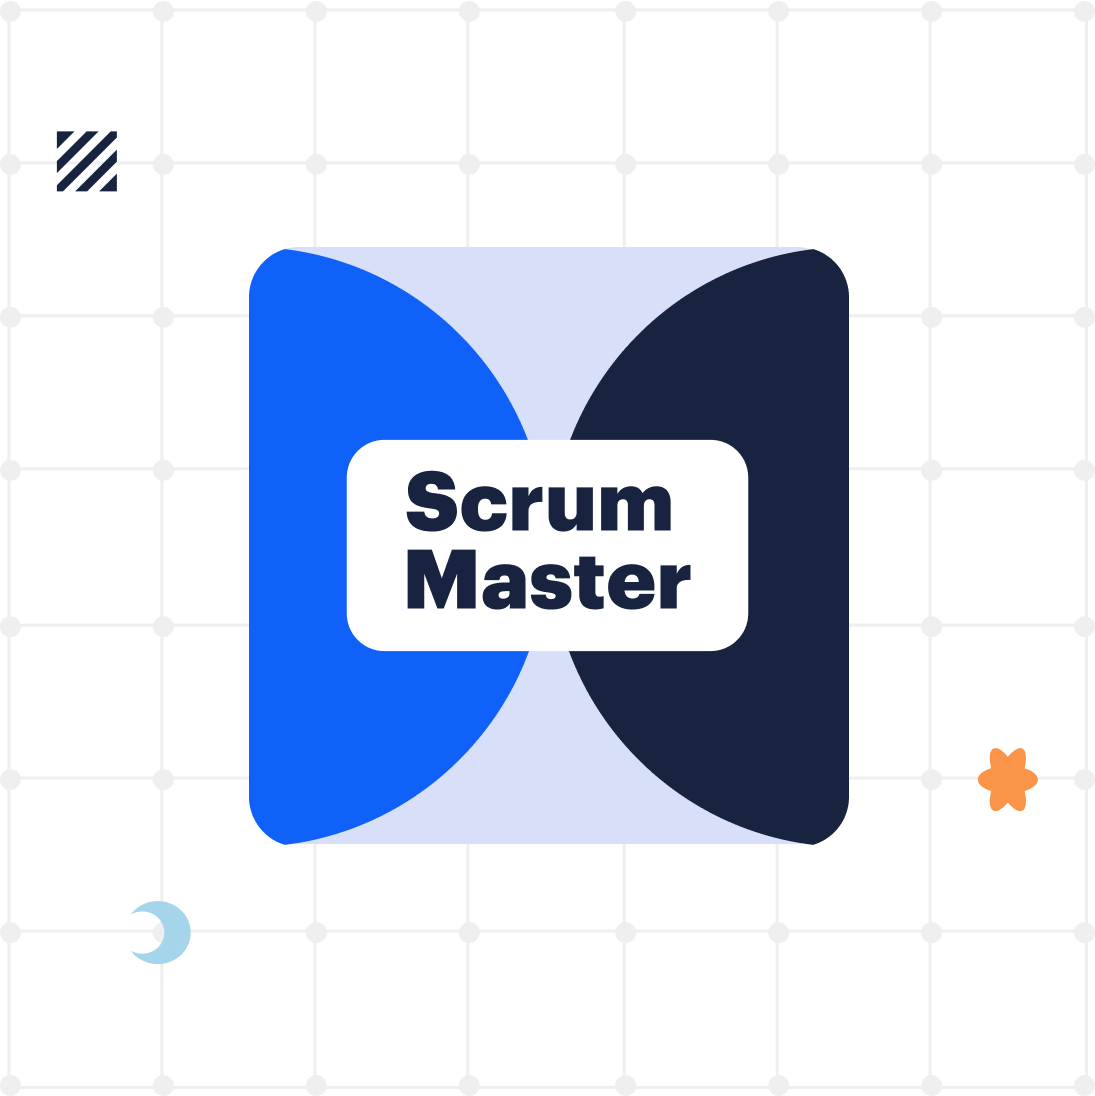 An illustration with the words "scrum master"